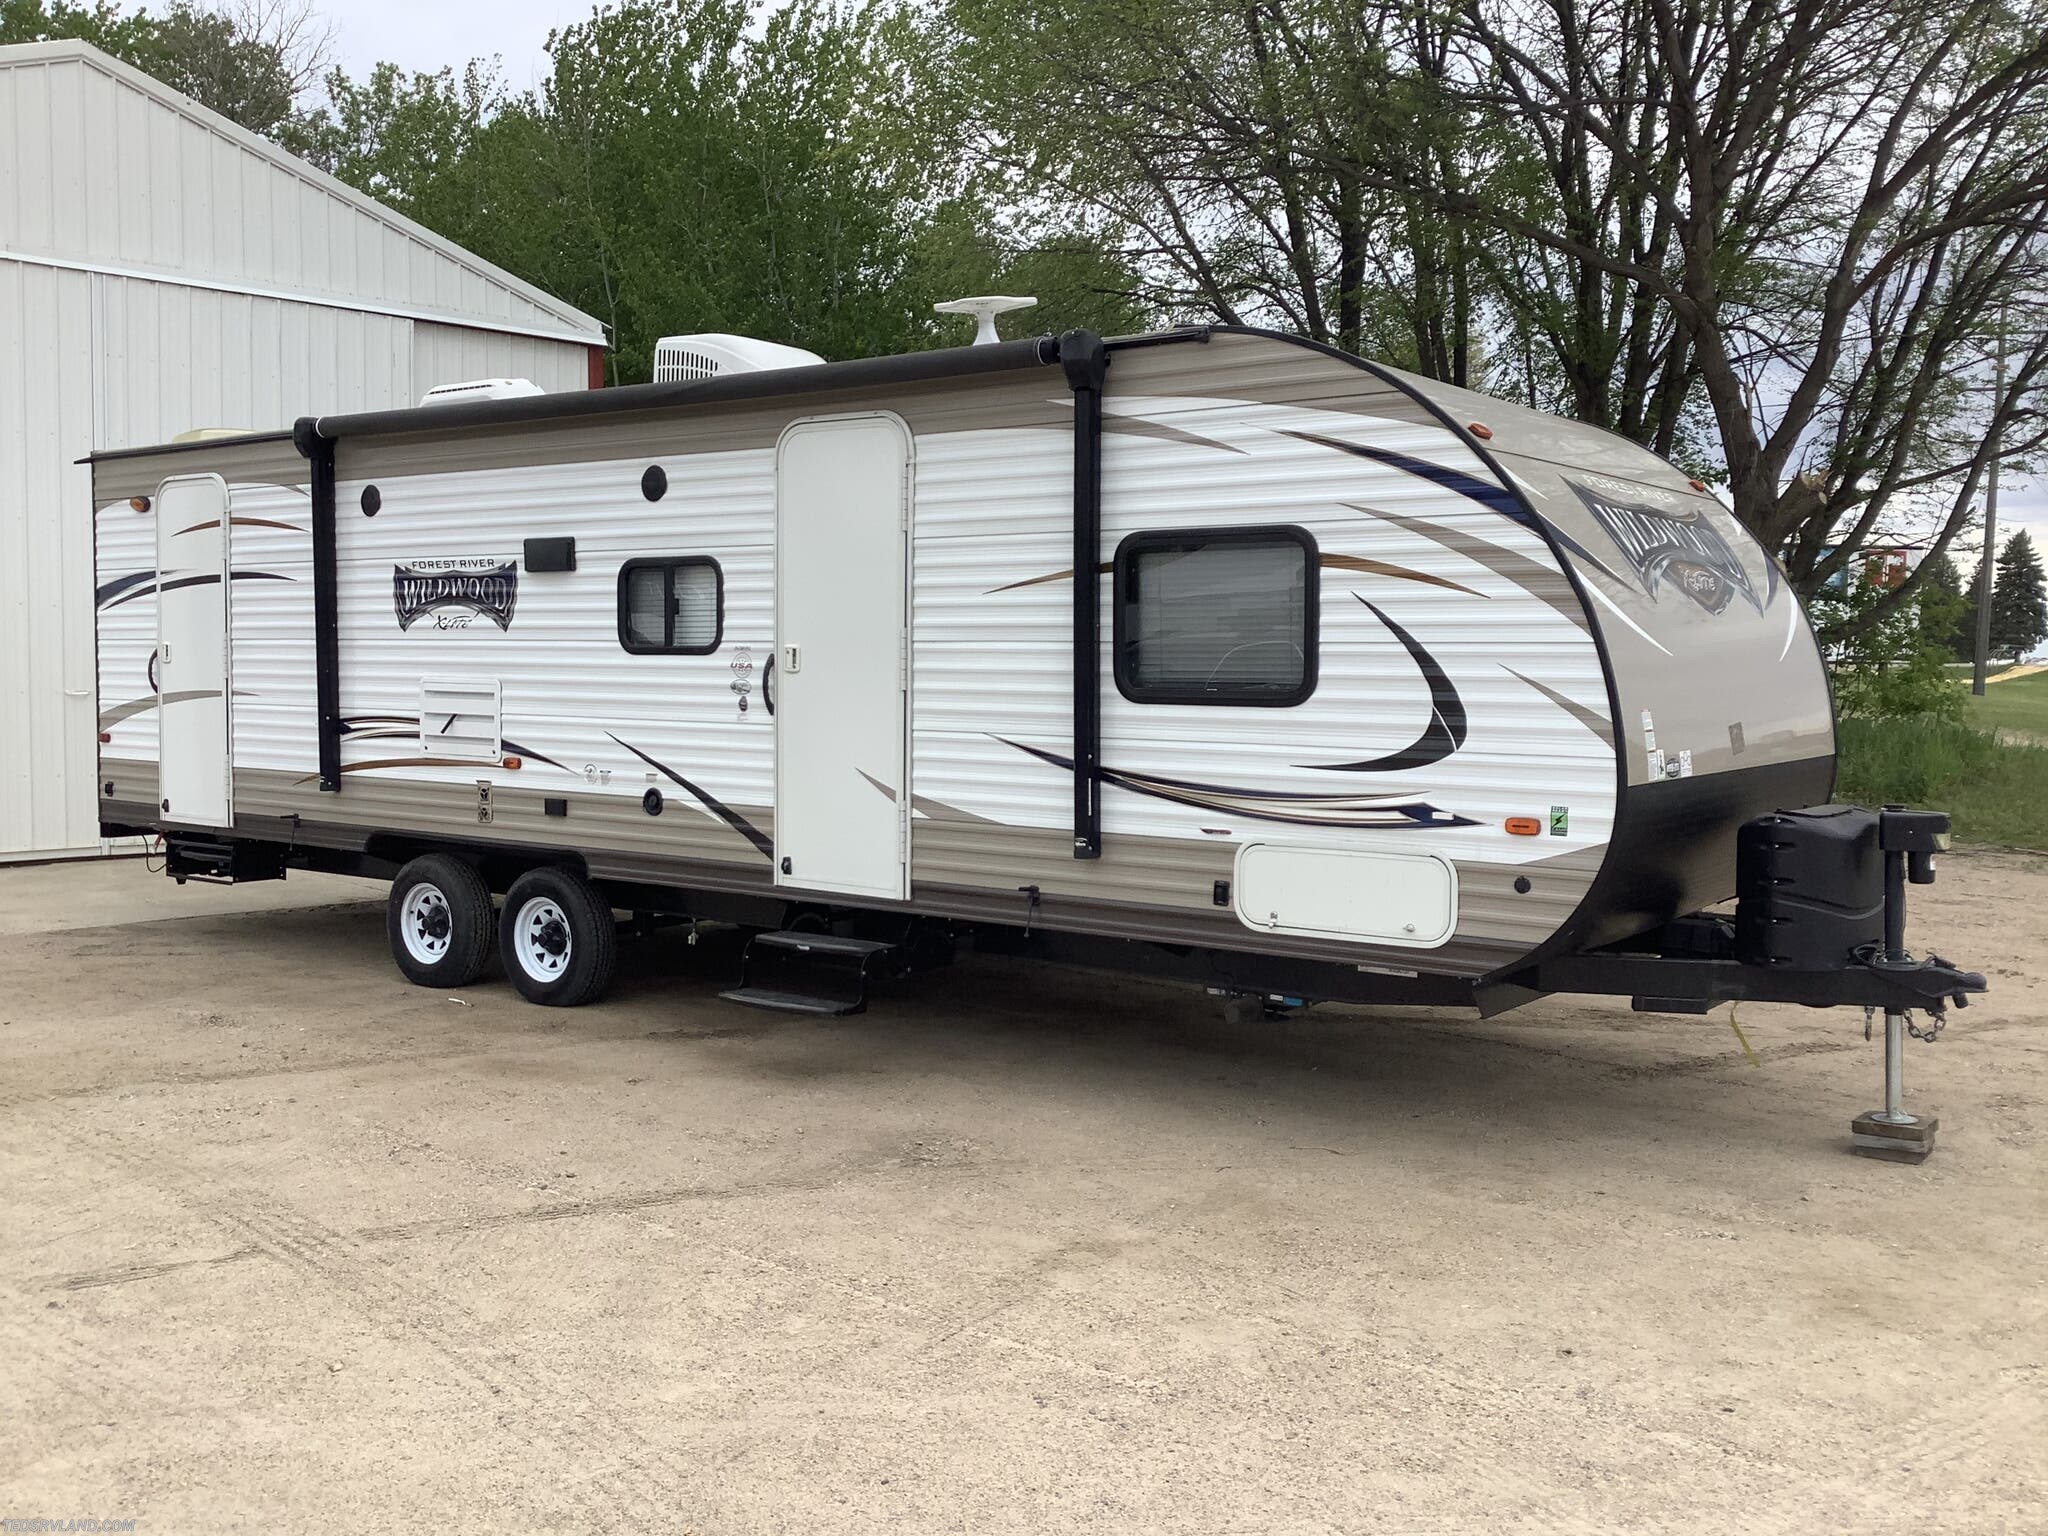 2018 Forest River Wildwood X-Lite 263BHXL RV for Sale in Paynesville, MN 56362 | J7358274 2018 Forest River Wildwood X Lite 263bhxl